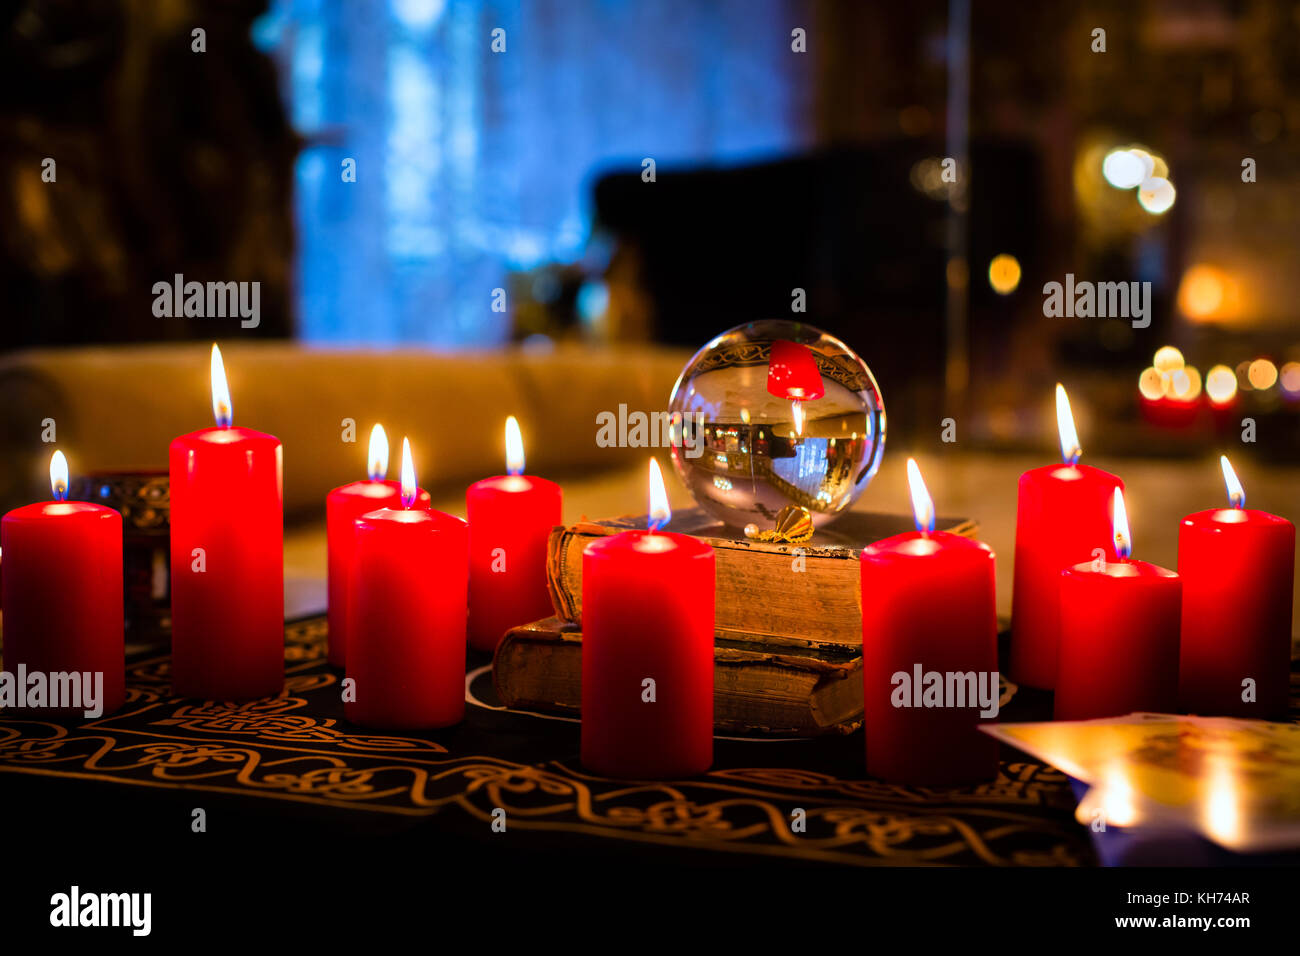 Crystal ball to prophesy or esoteric clairvoyance during a Seance in the candle light Stock Photo